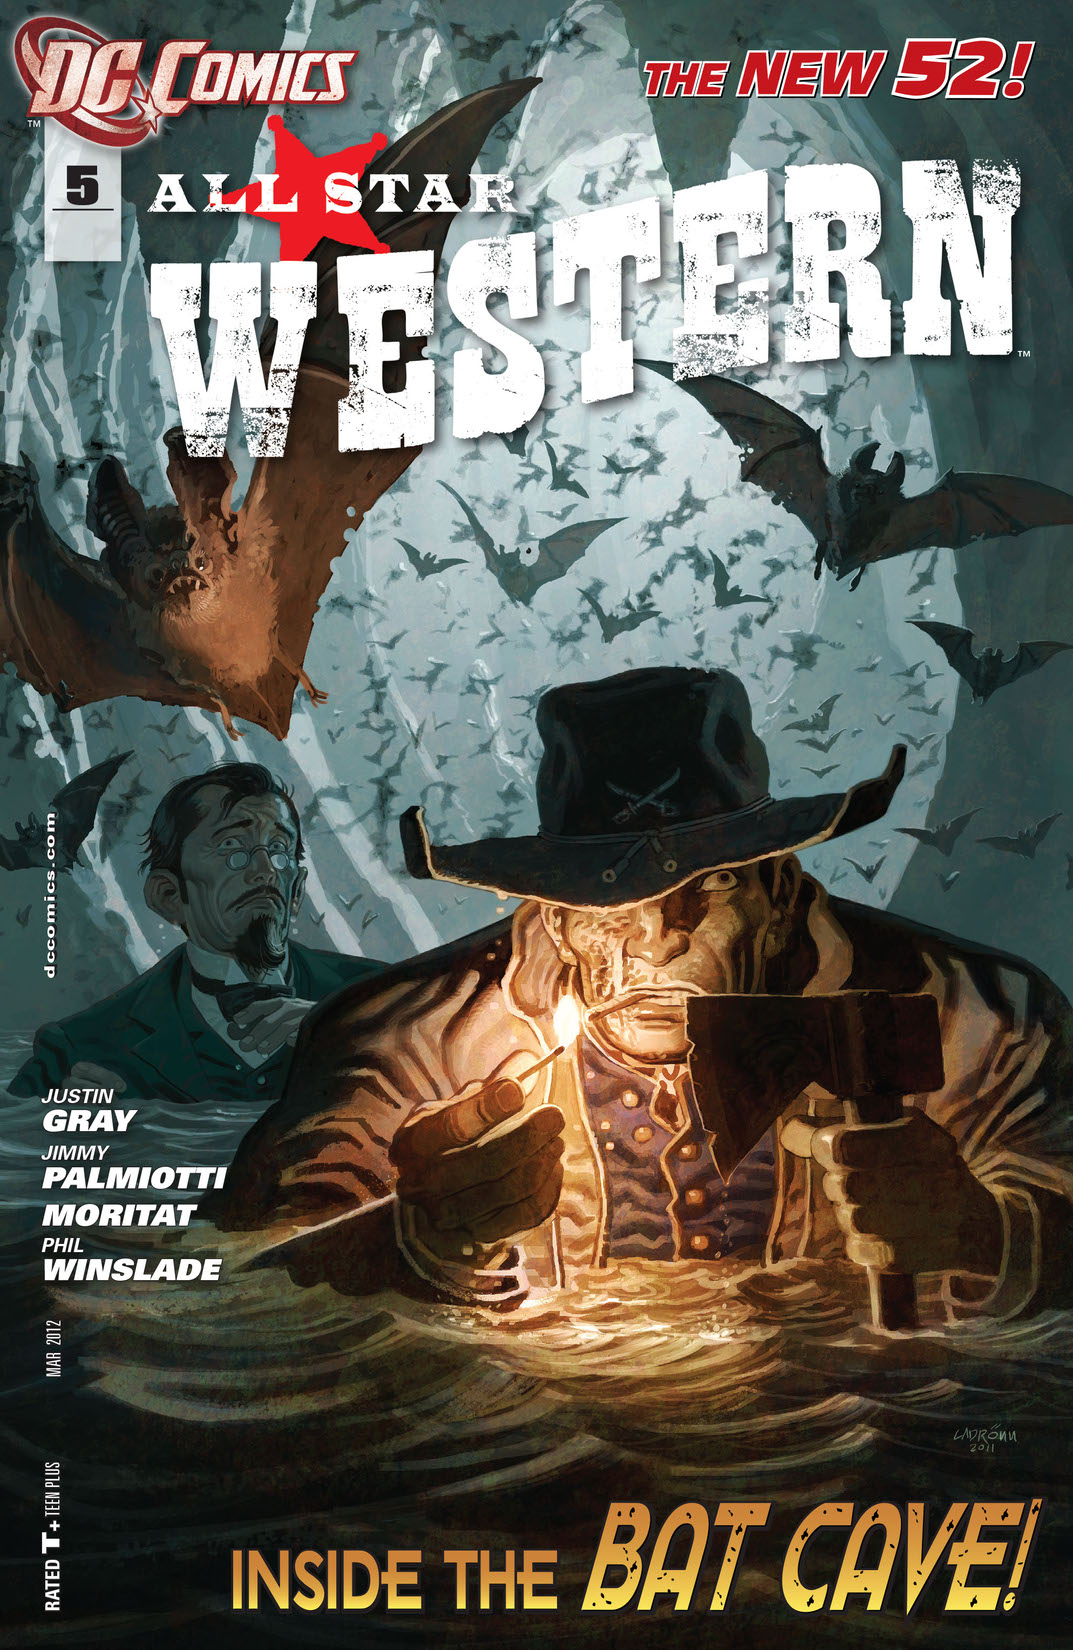 All Star Western #5 preview images